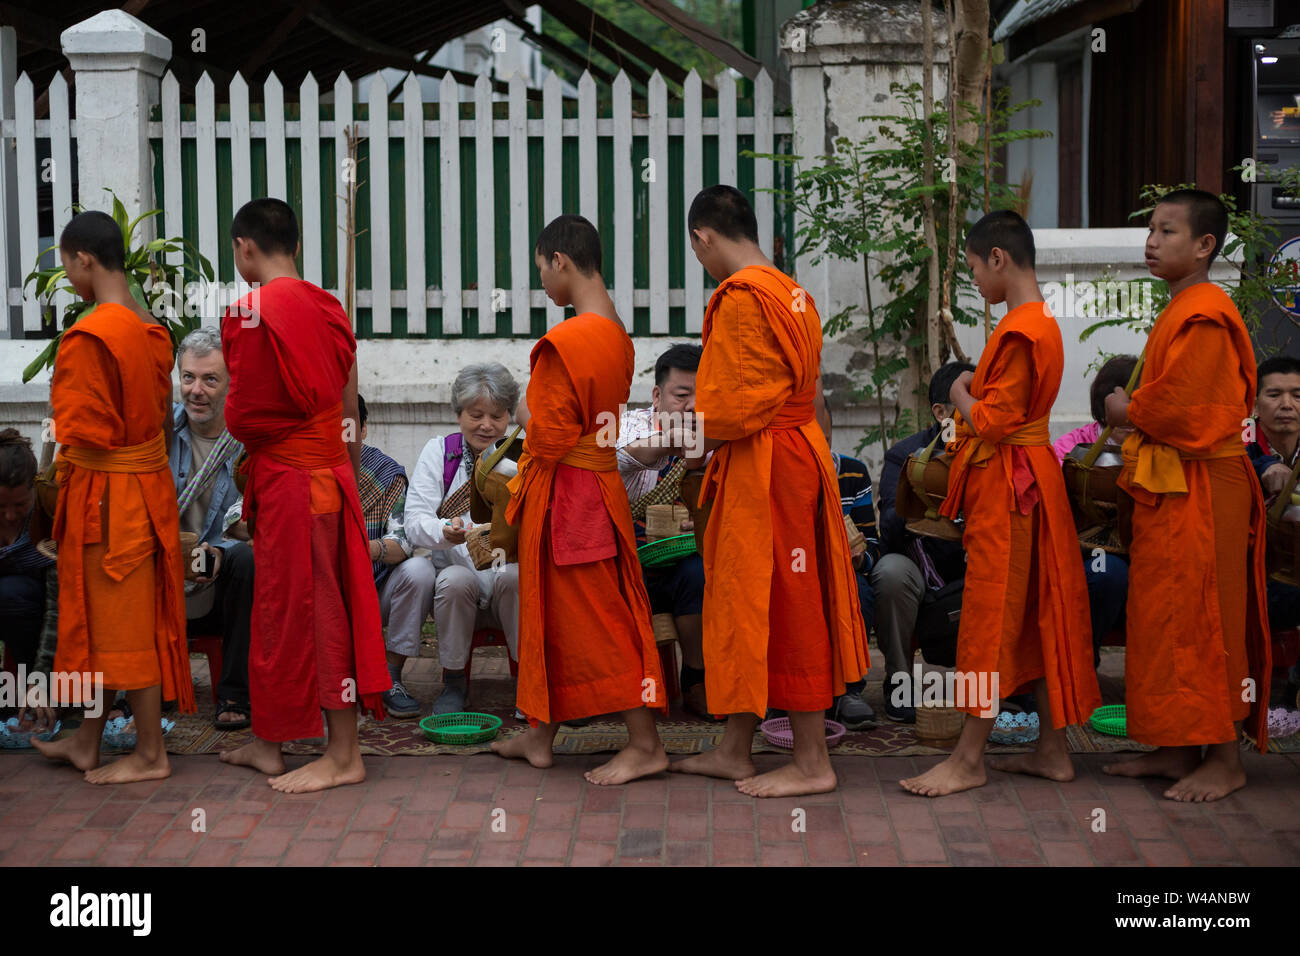 People giving alms to young Buddhist monks on the street early in the morning in Luang Prabang, Laos. The ritual is called Tak Bat. Stock Photo